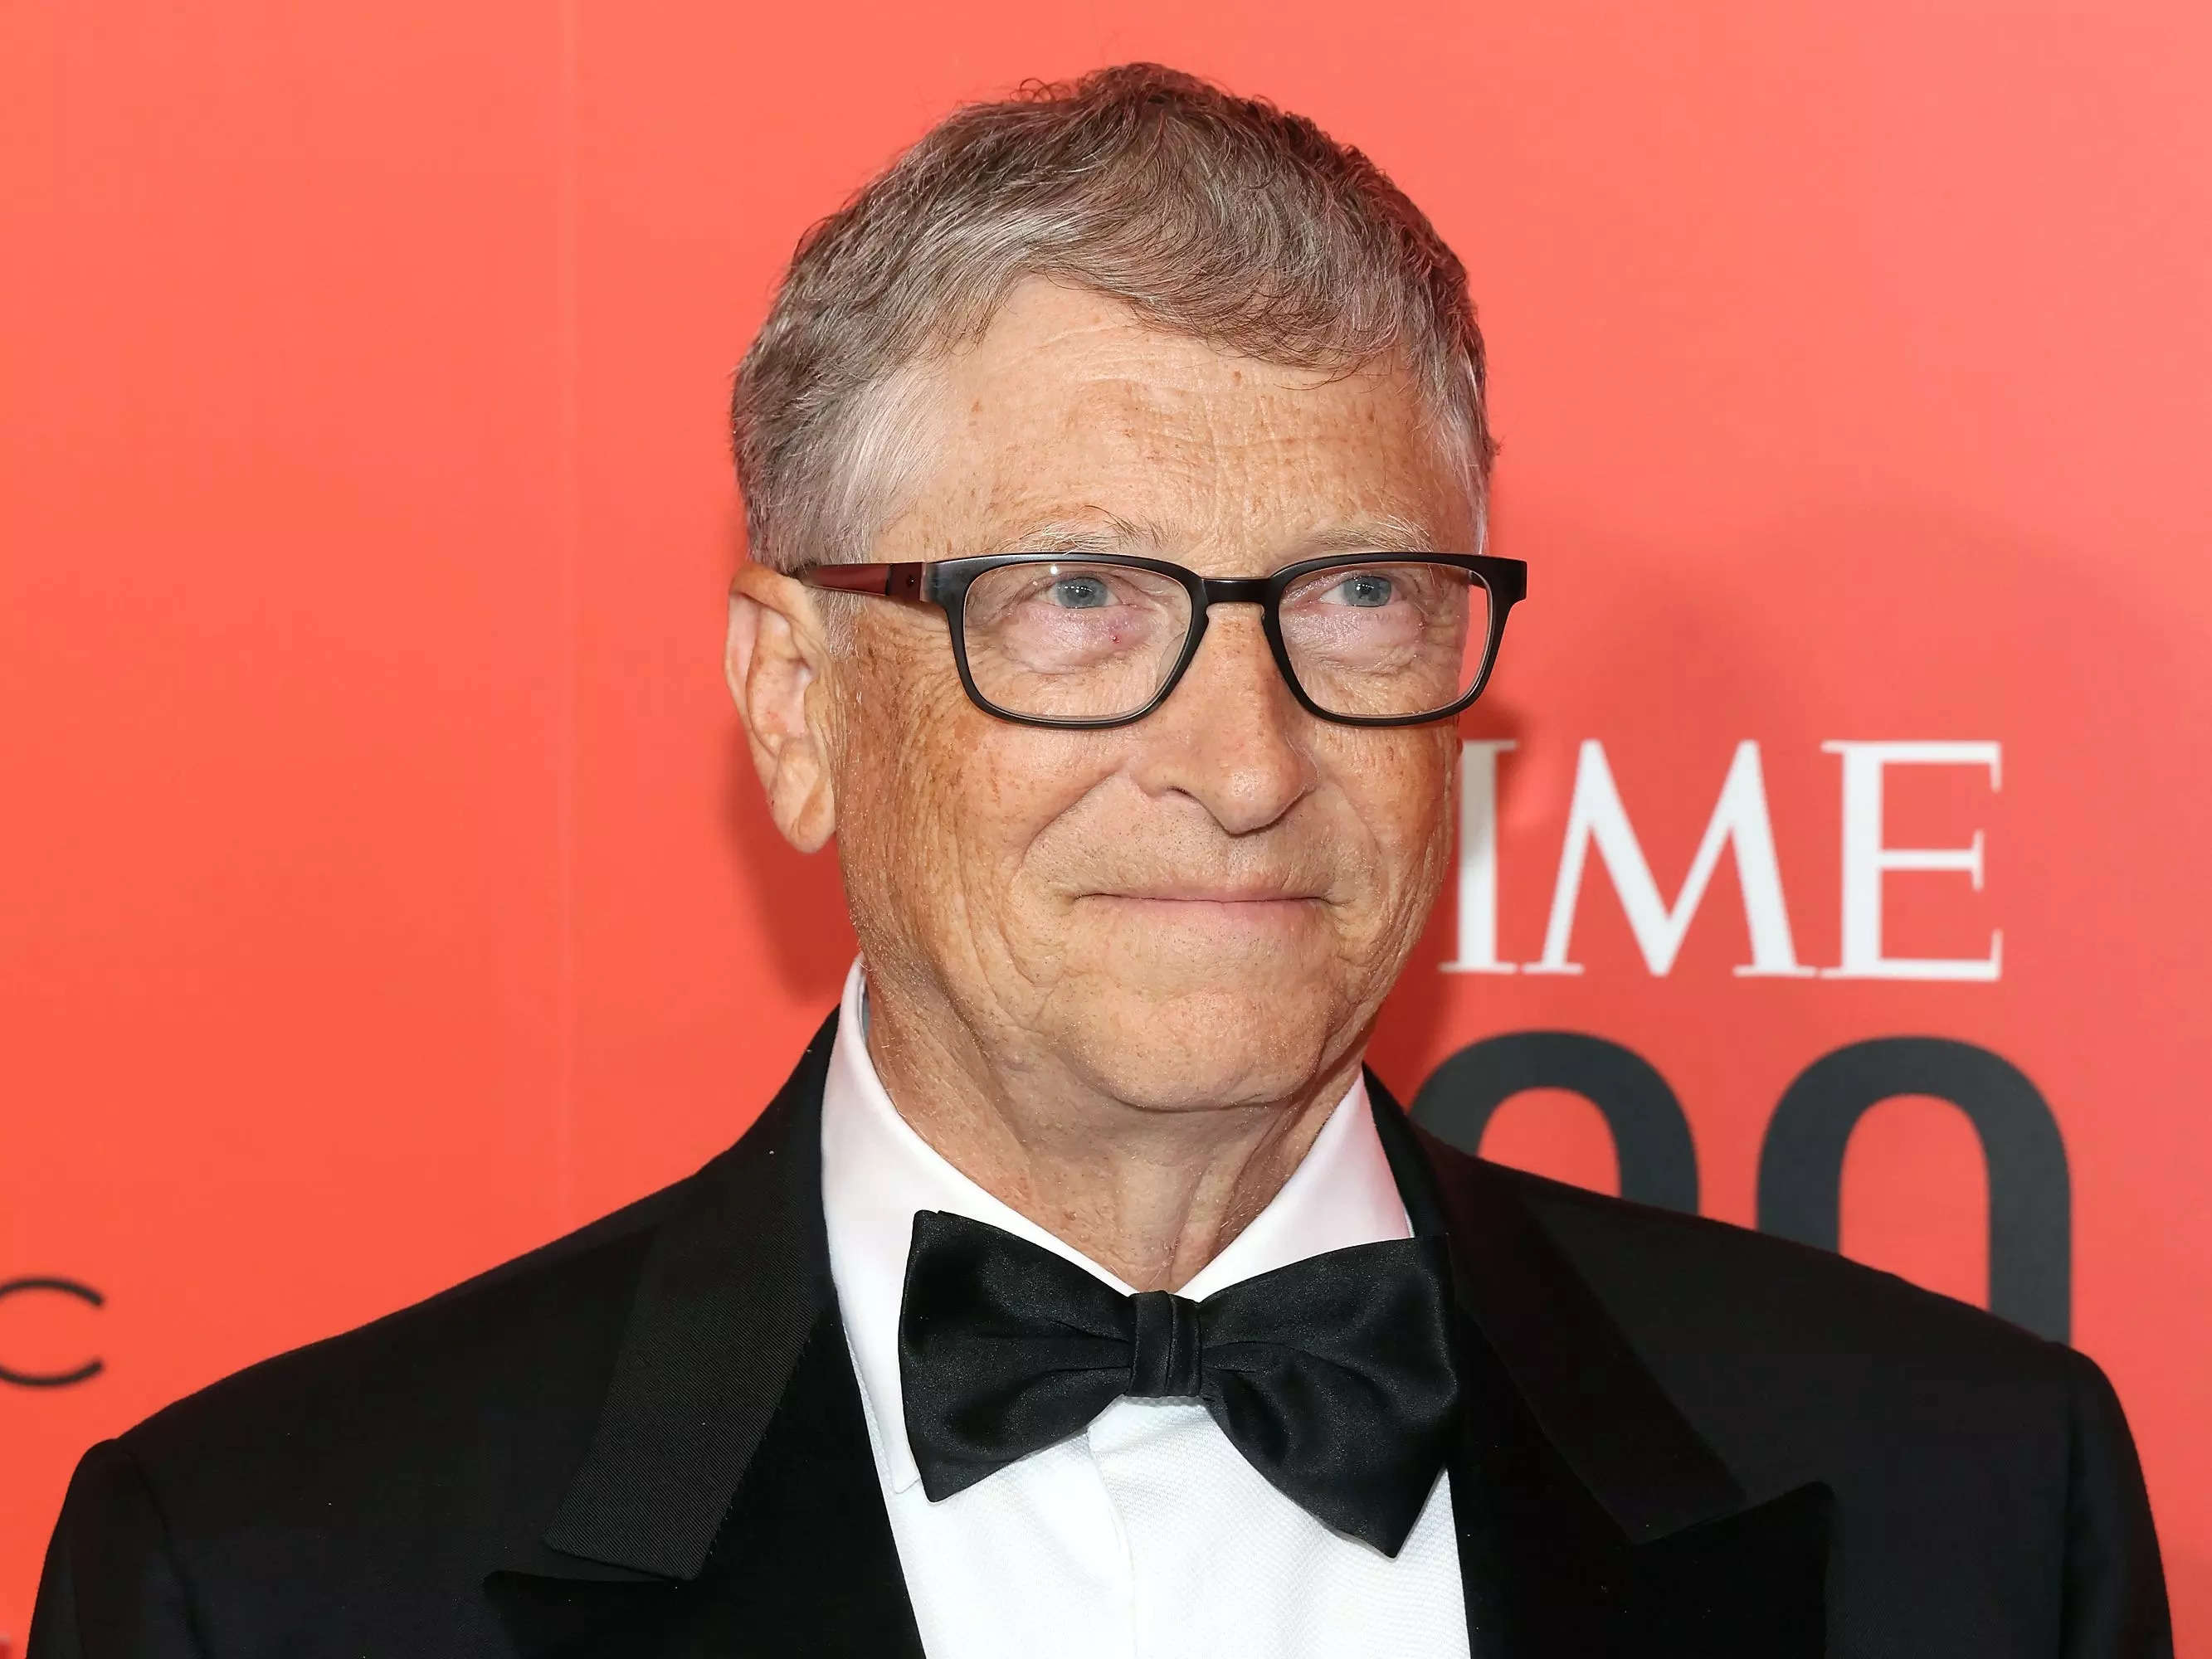 Bill Gates just published a 7-page letter about AI and his predictions for its future